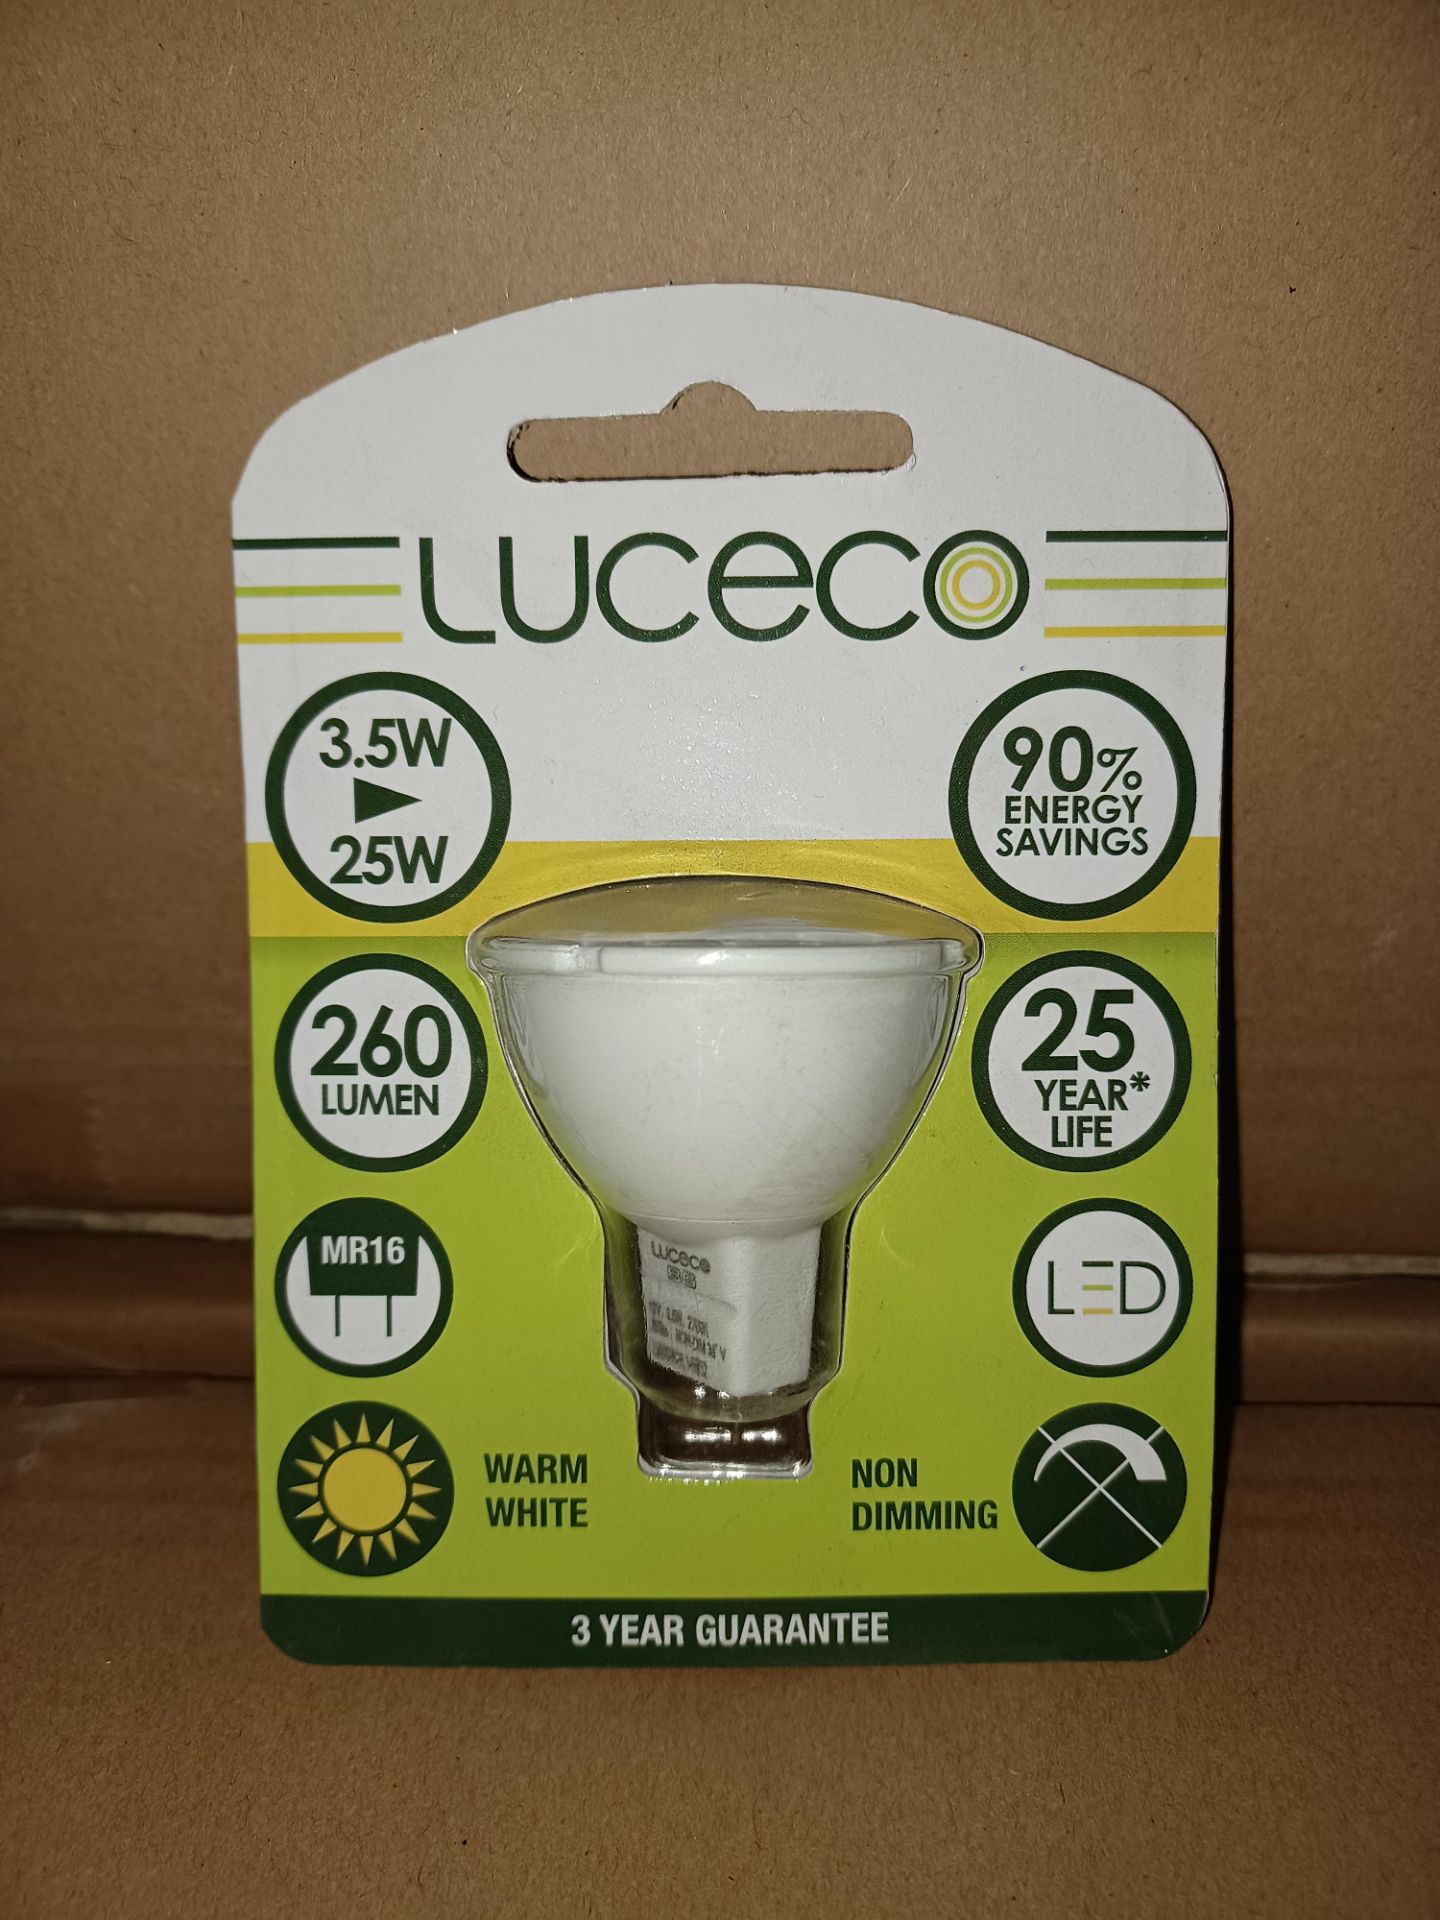 100 X BRAND NEW LUCUCO 3.5W =25W MR16 260 LUMEN LIGHT BULBS IN 2 BOXES R19